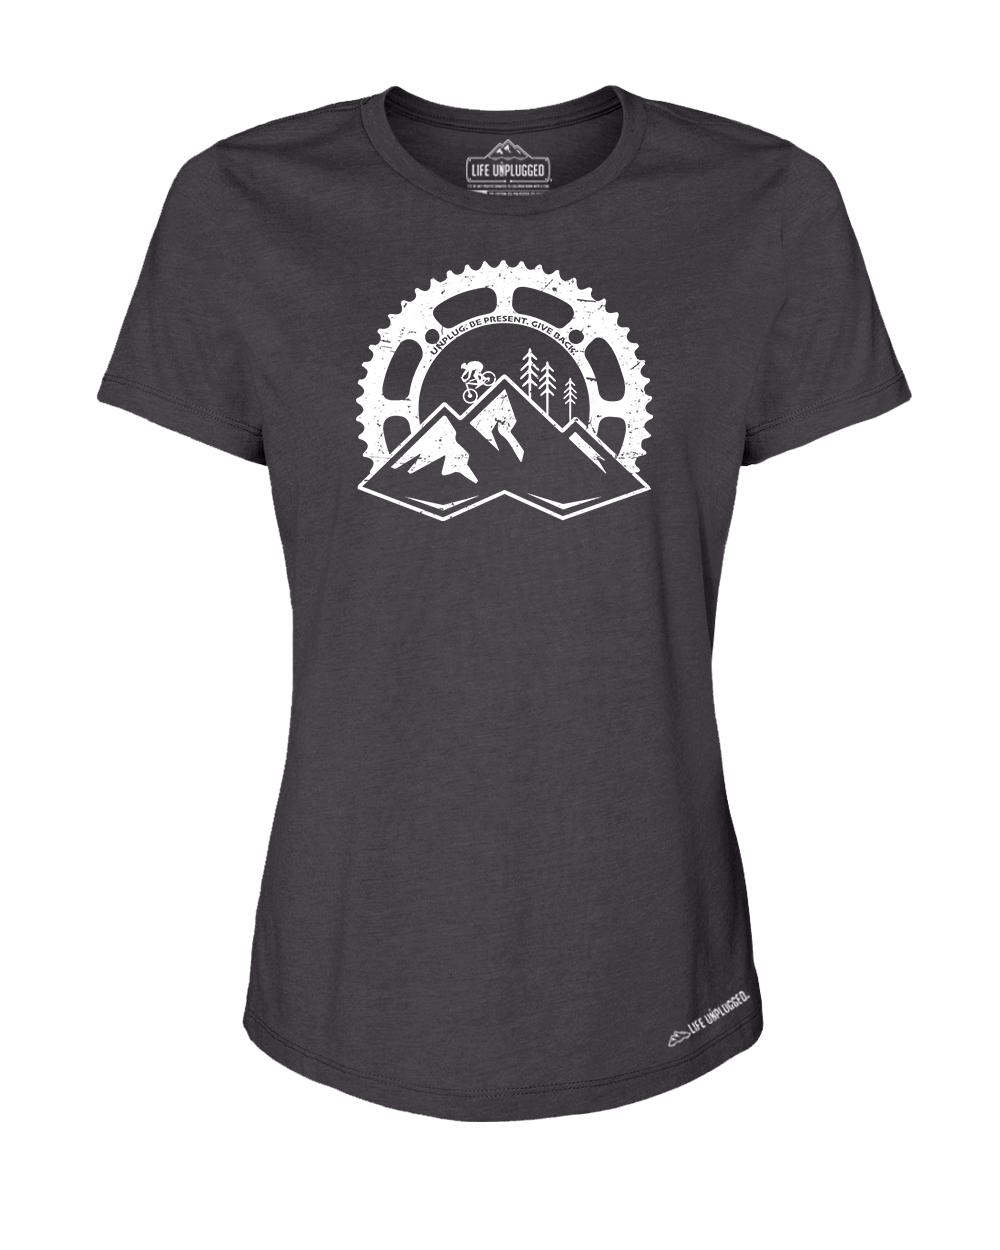 Riding Into The Sunset Premium Women's Relaxed Fit Polyblend T-Shirt - Life Unplugged